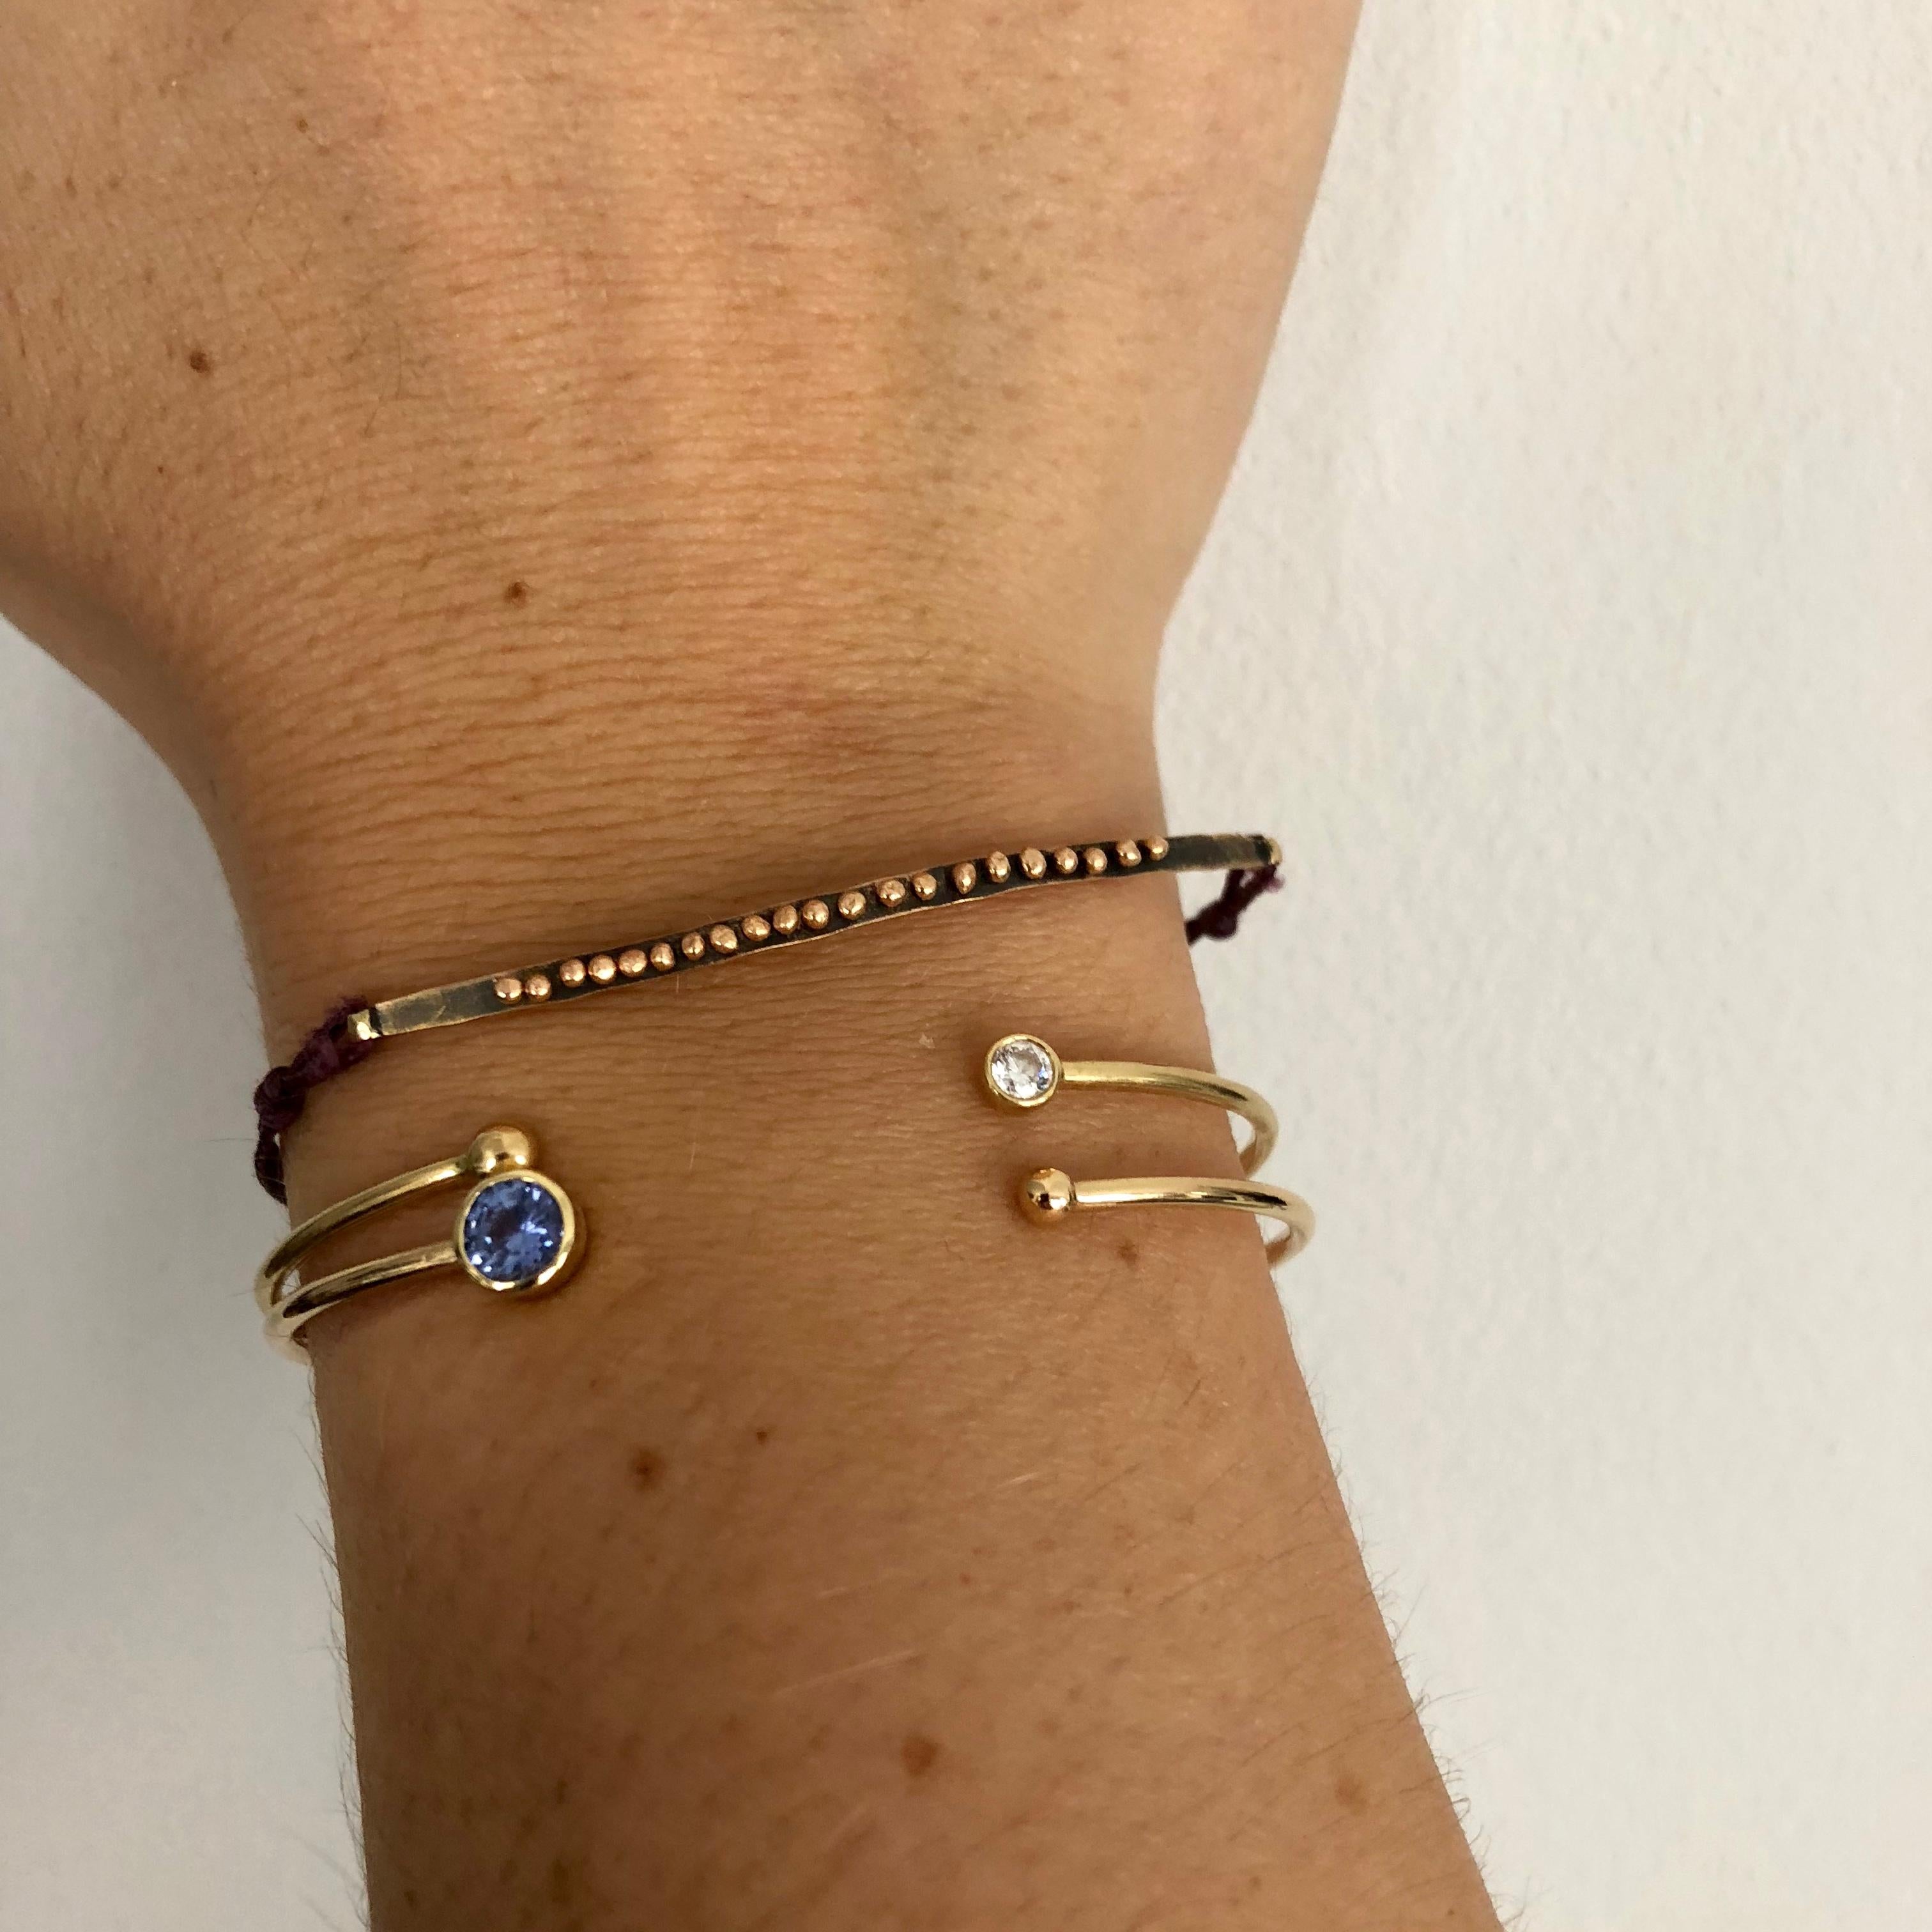 A modern gold bangle made with a 4.5mm ceylon blue Sapphire from Sri Lanka. The gold bangle fits elegantly around the wrist with a gap at the top to fit your wrist through as you put it on. A fabulous modern design for everyday wear. 

- Ceylon